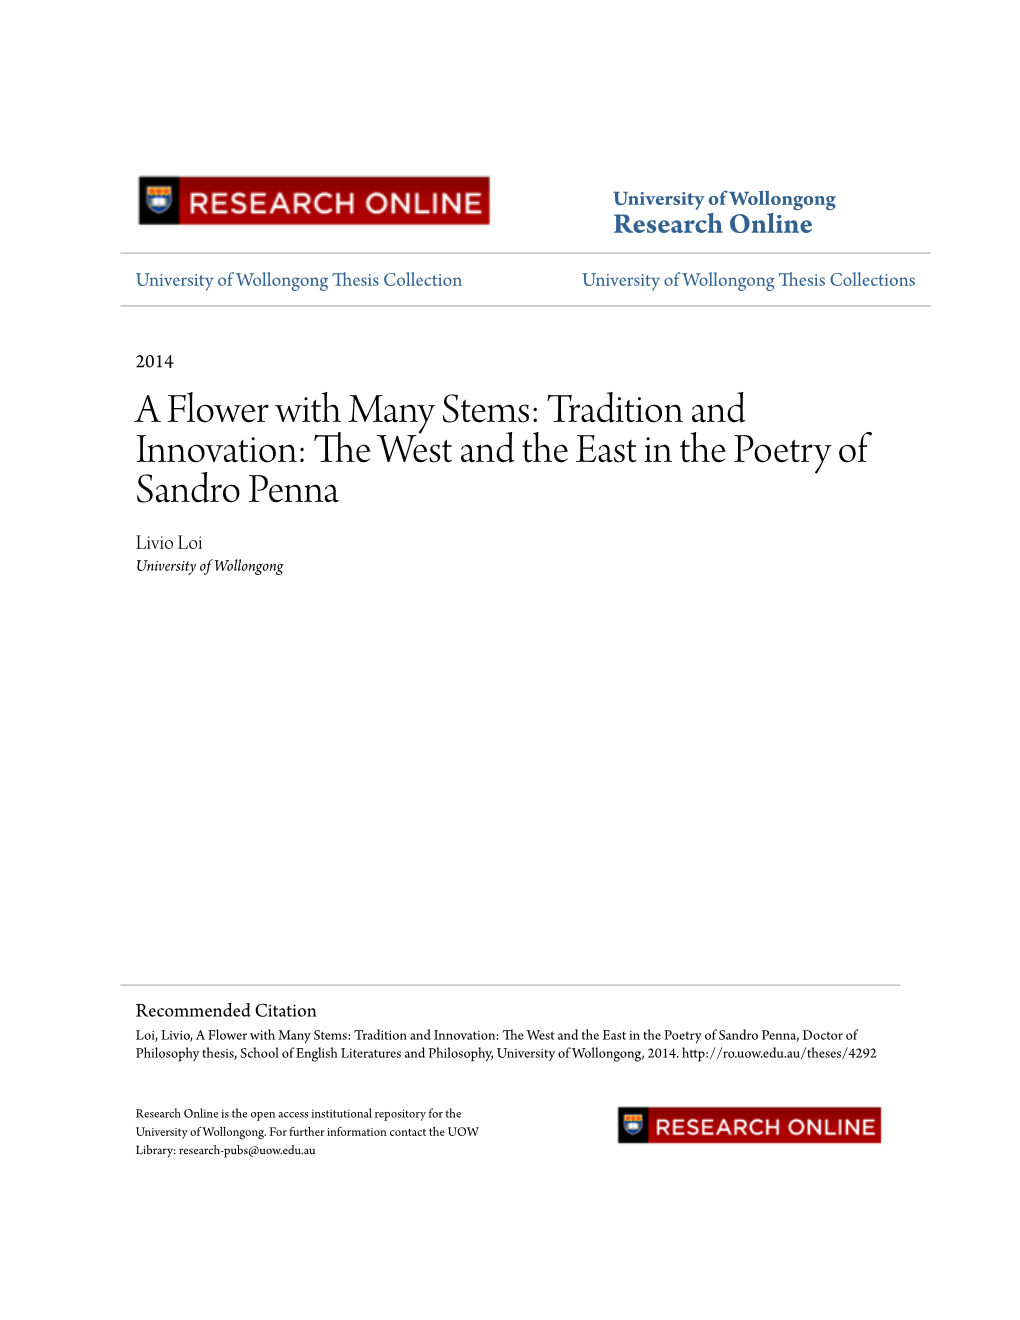 The West and the East in the Poetry of Sandro Penna